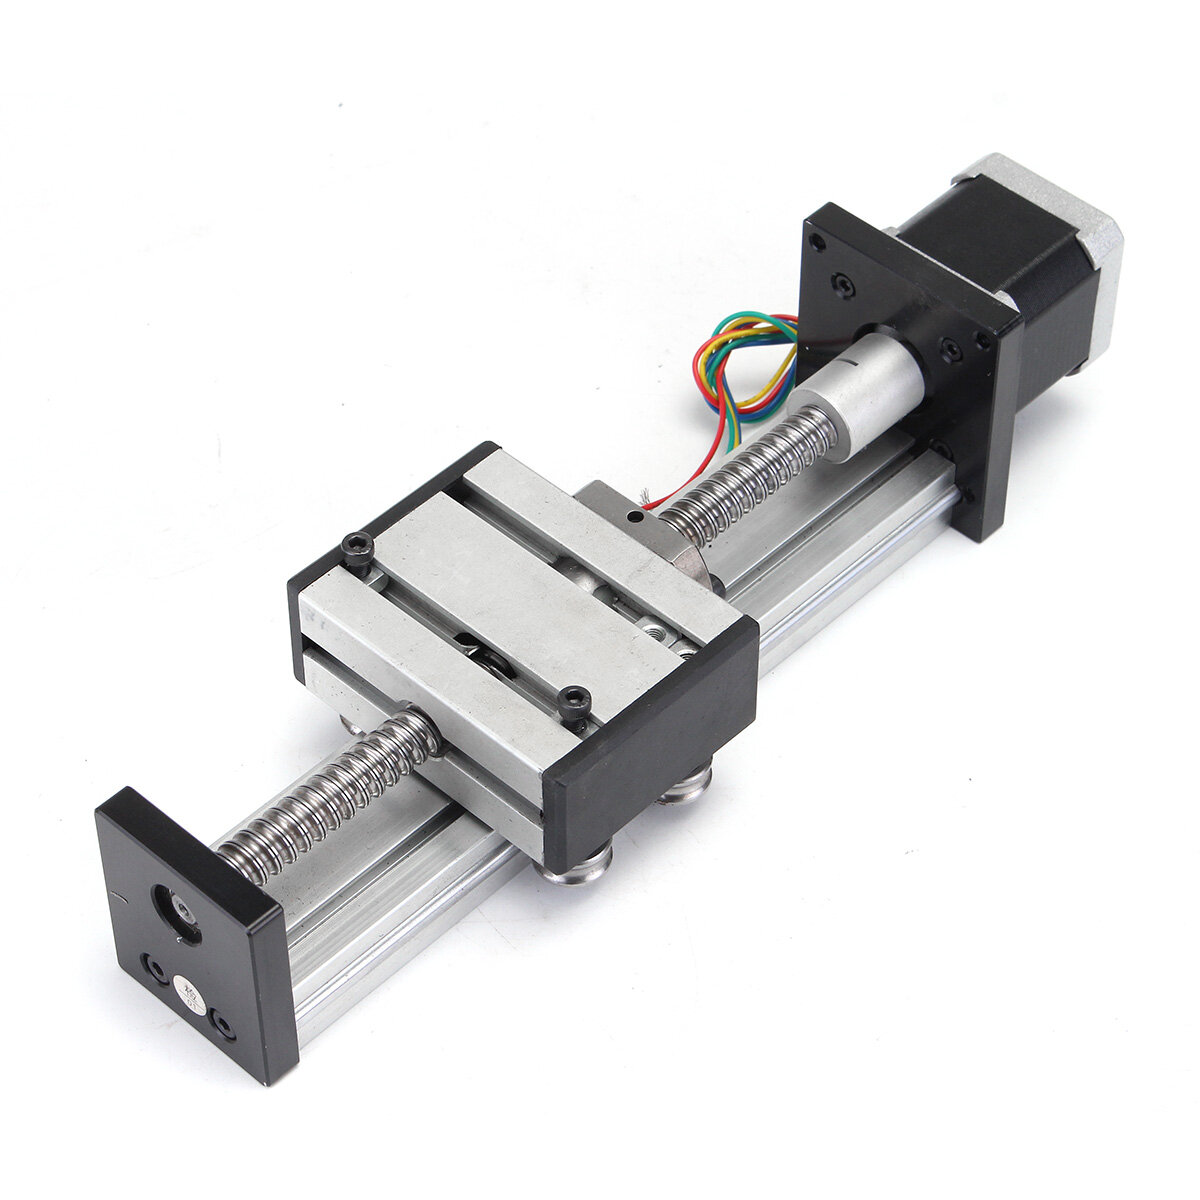 GUONING-L Tools Long 100mm Stage Actuator Linear Stage 1204 Ball Screw Linear Slide Stroke with 42mm Stepper Motor Linear Motion Products Stepper Motor 